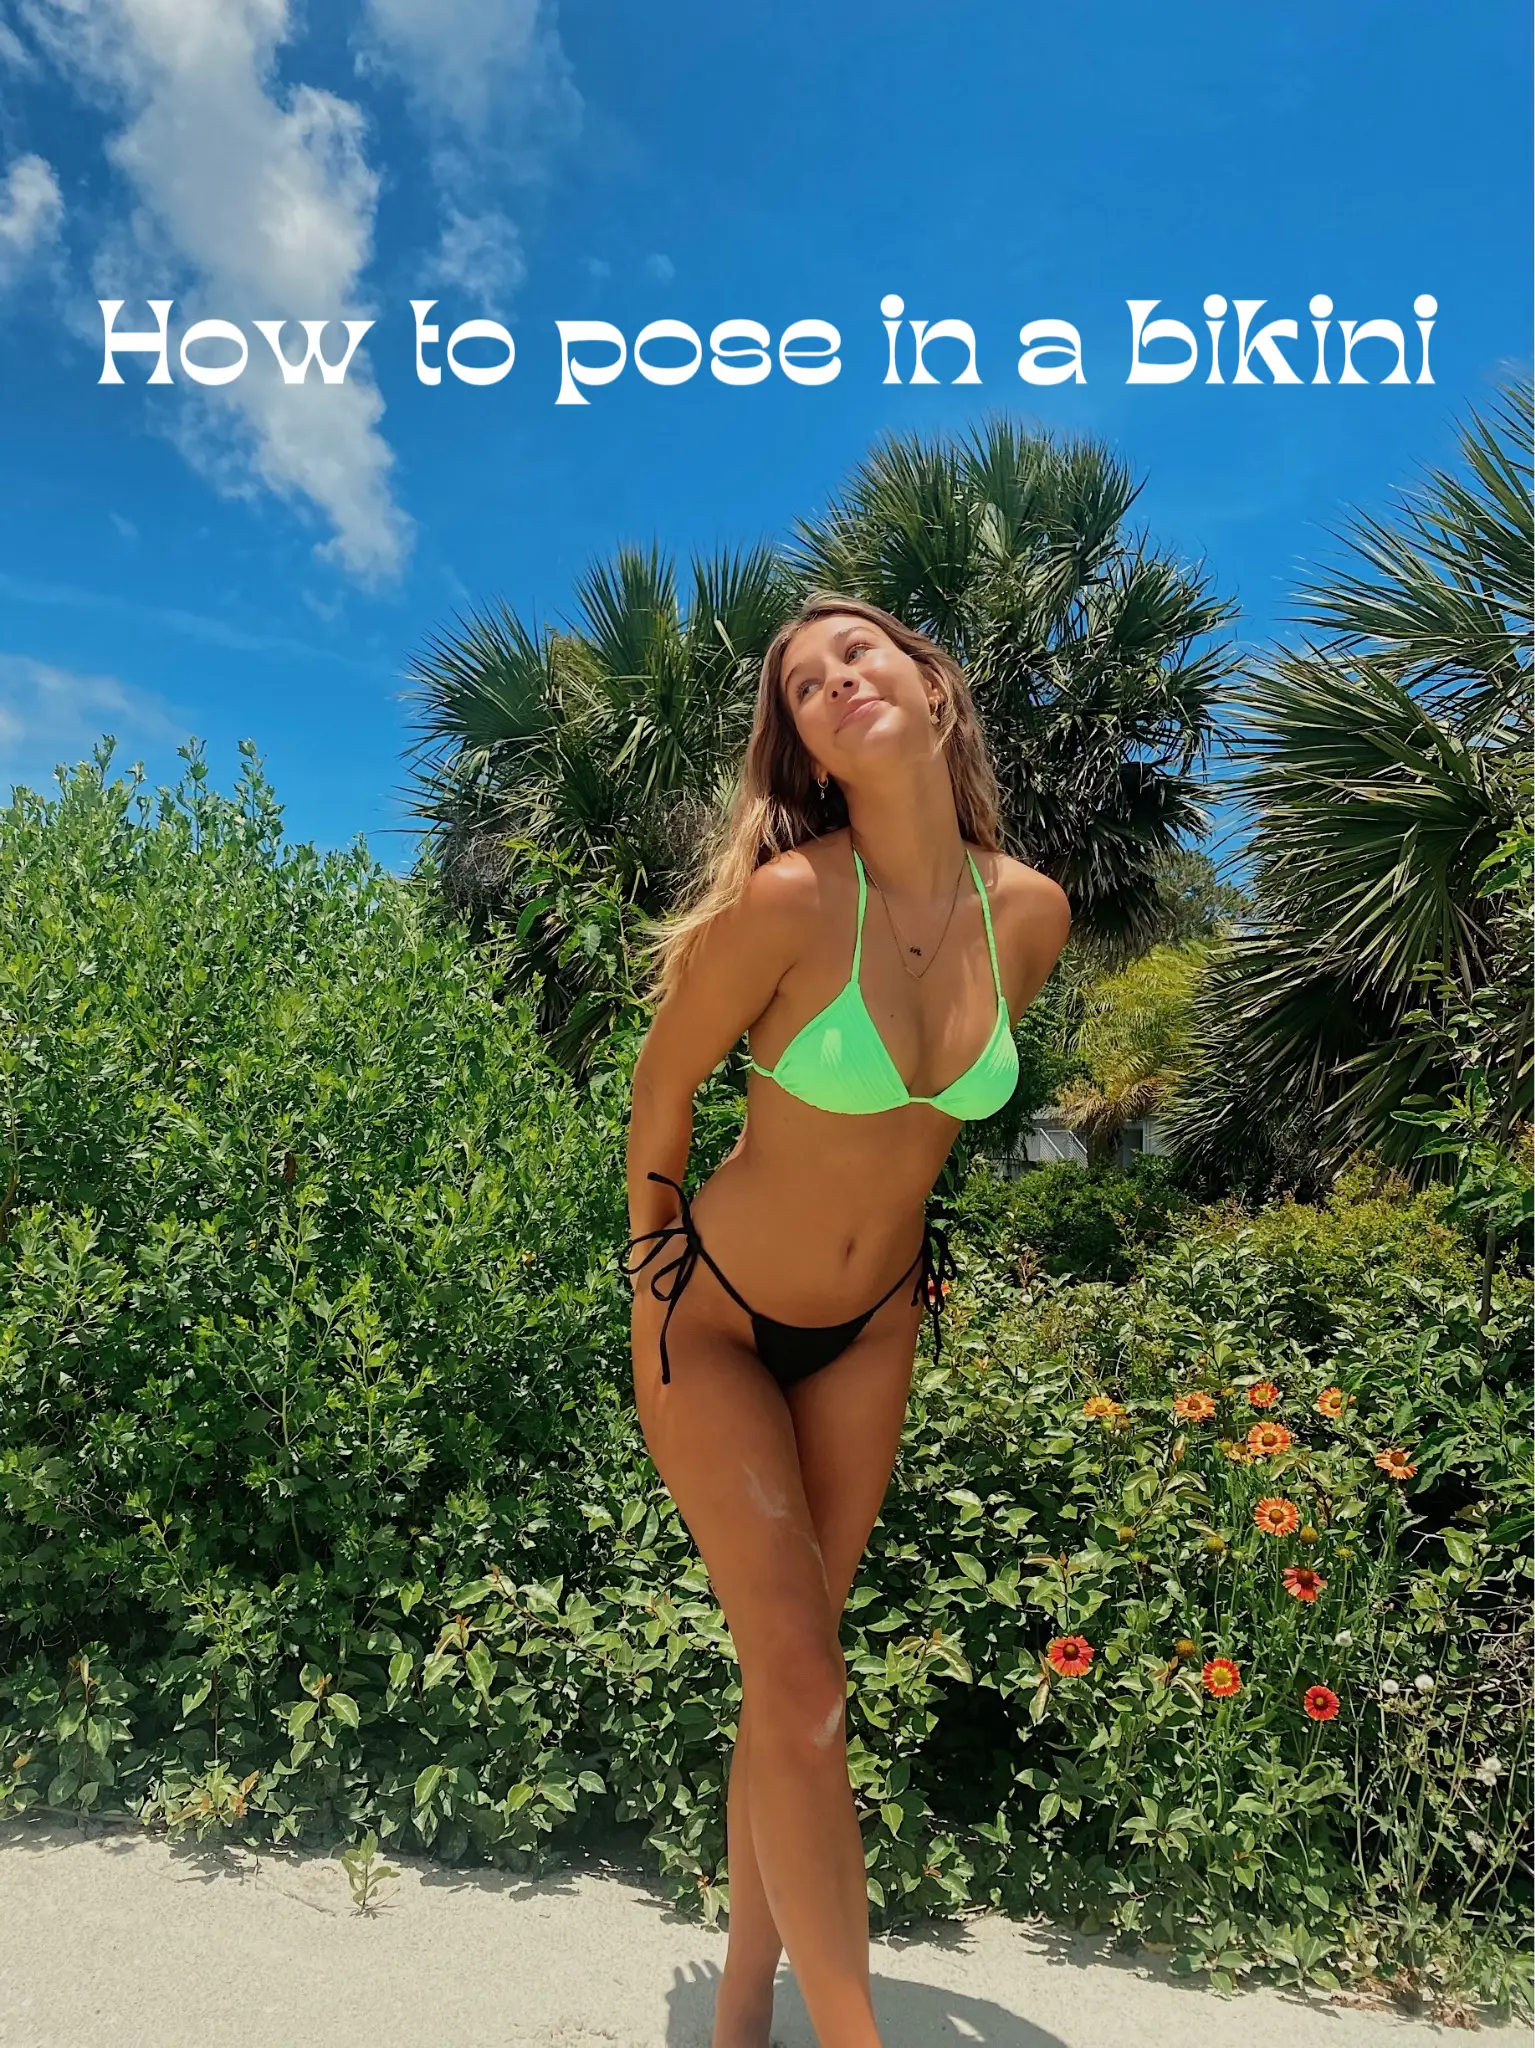 How to pose in a bikini👙's images